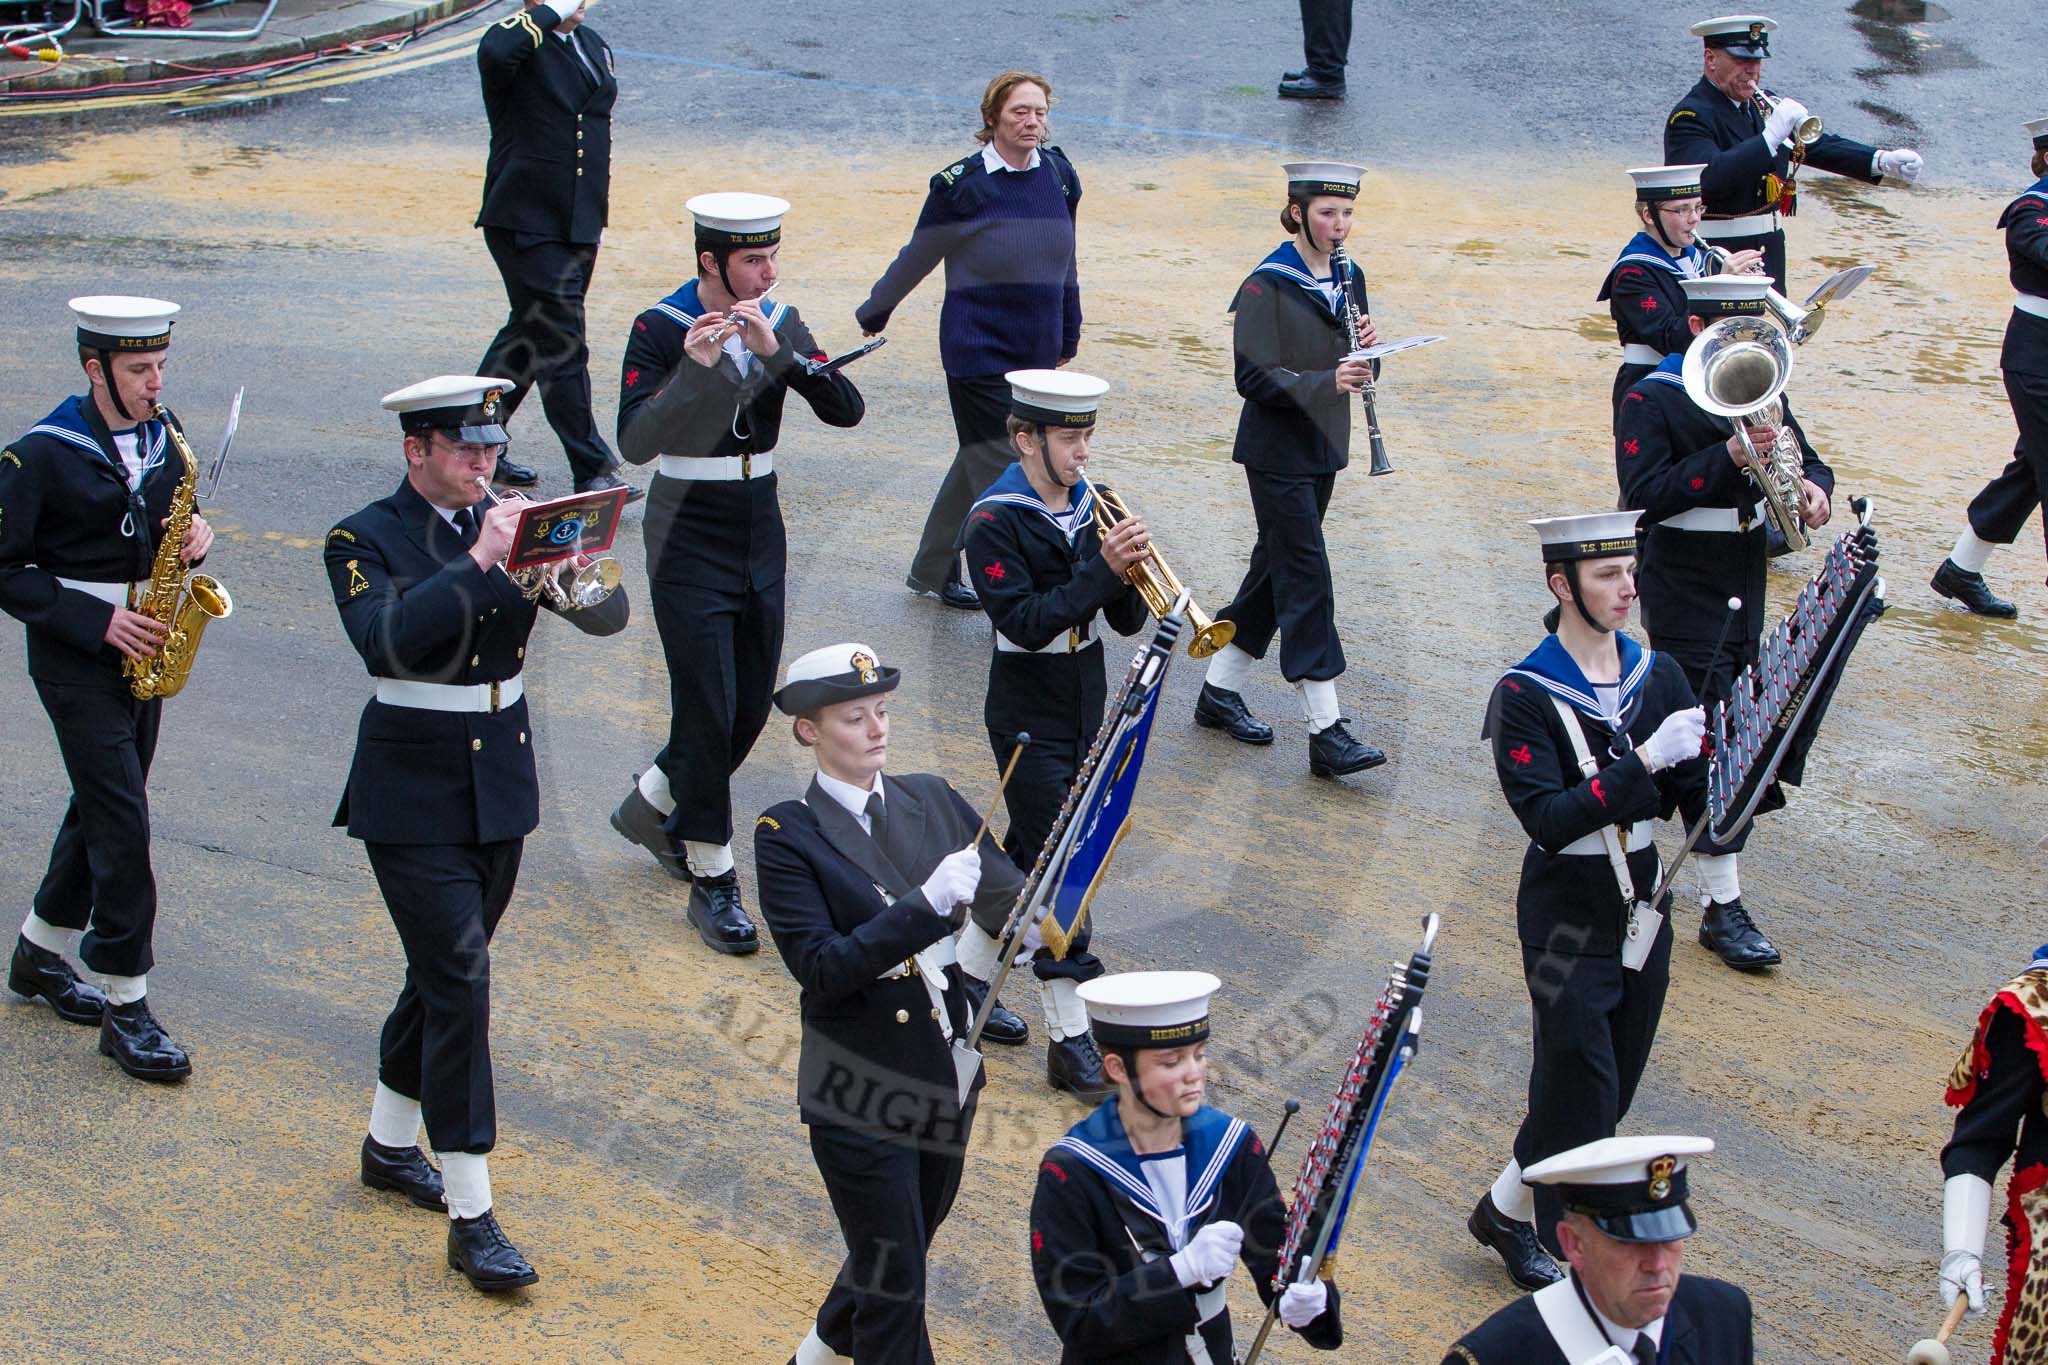 Lord Mayor's Show 2012: Entry 98 - Sea Cadet Corps Band..
Press stand opposite Mansion House, City of London,
London,
Greater London,
United Kingdom,
on 10 November 2012 at 11:45, image #1314